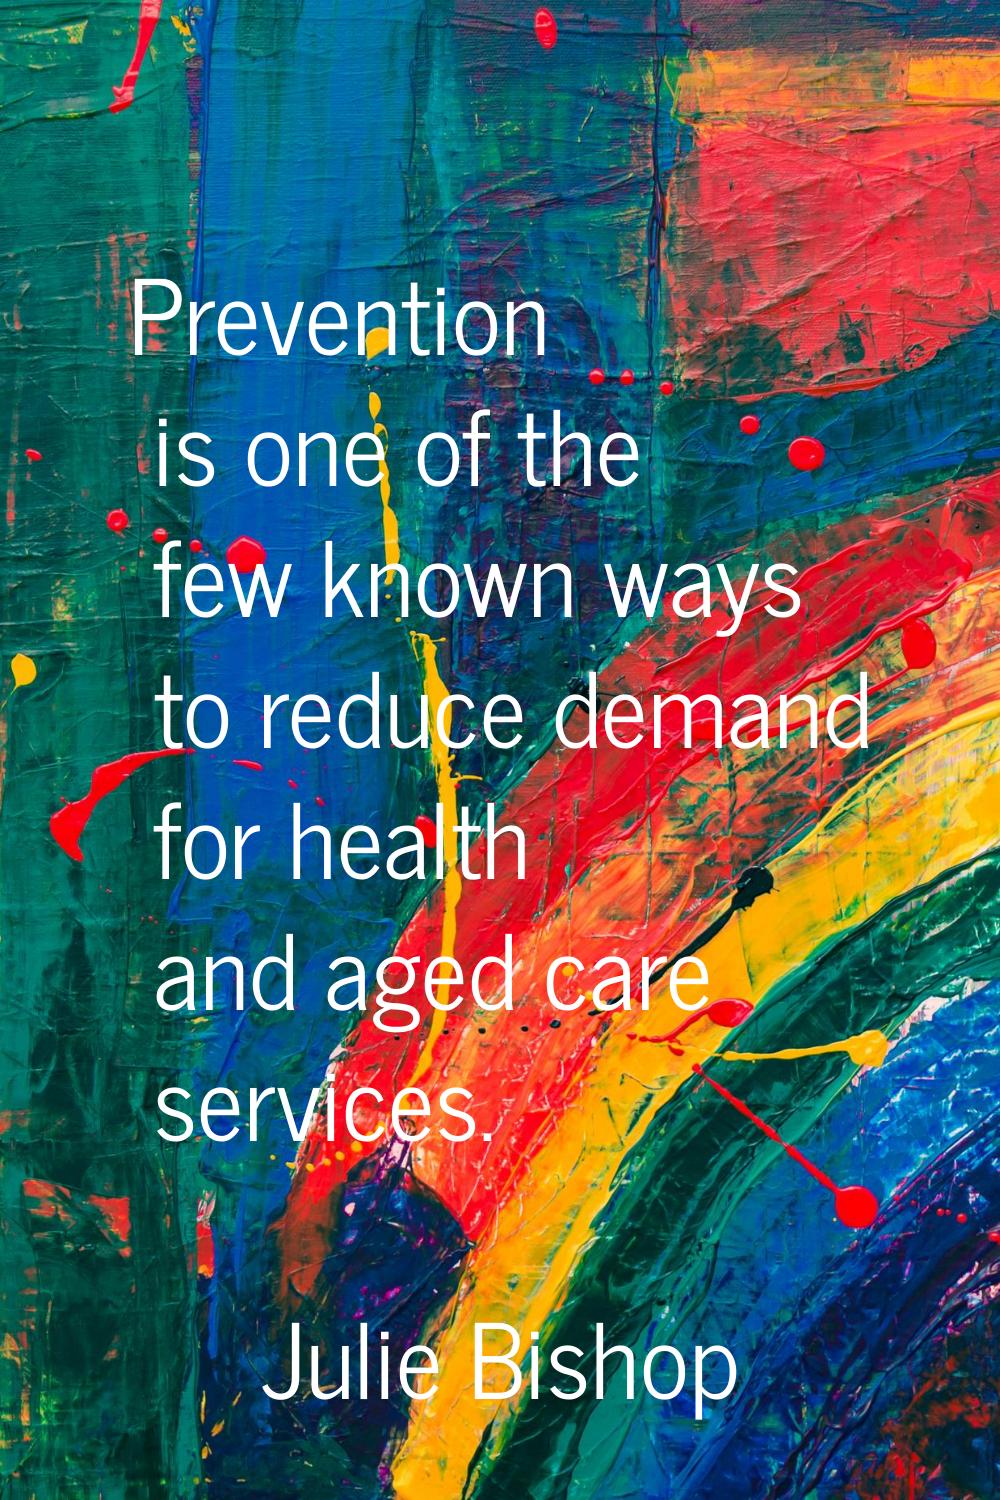 Prevention is one of the few known ways to reduce demand for health and aged care services.